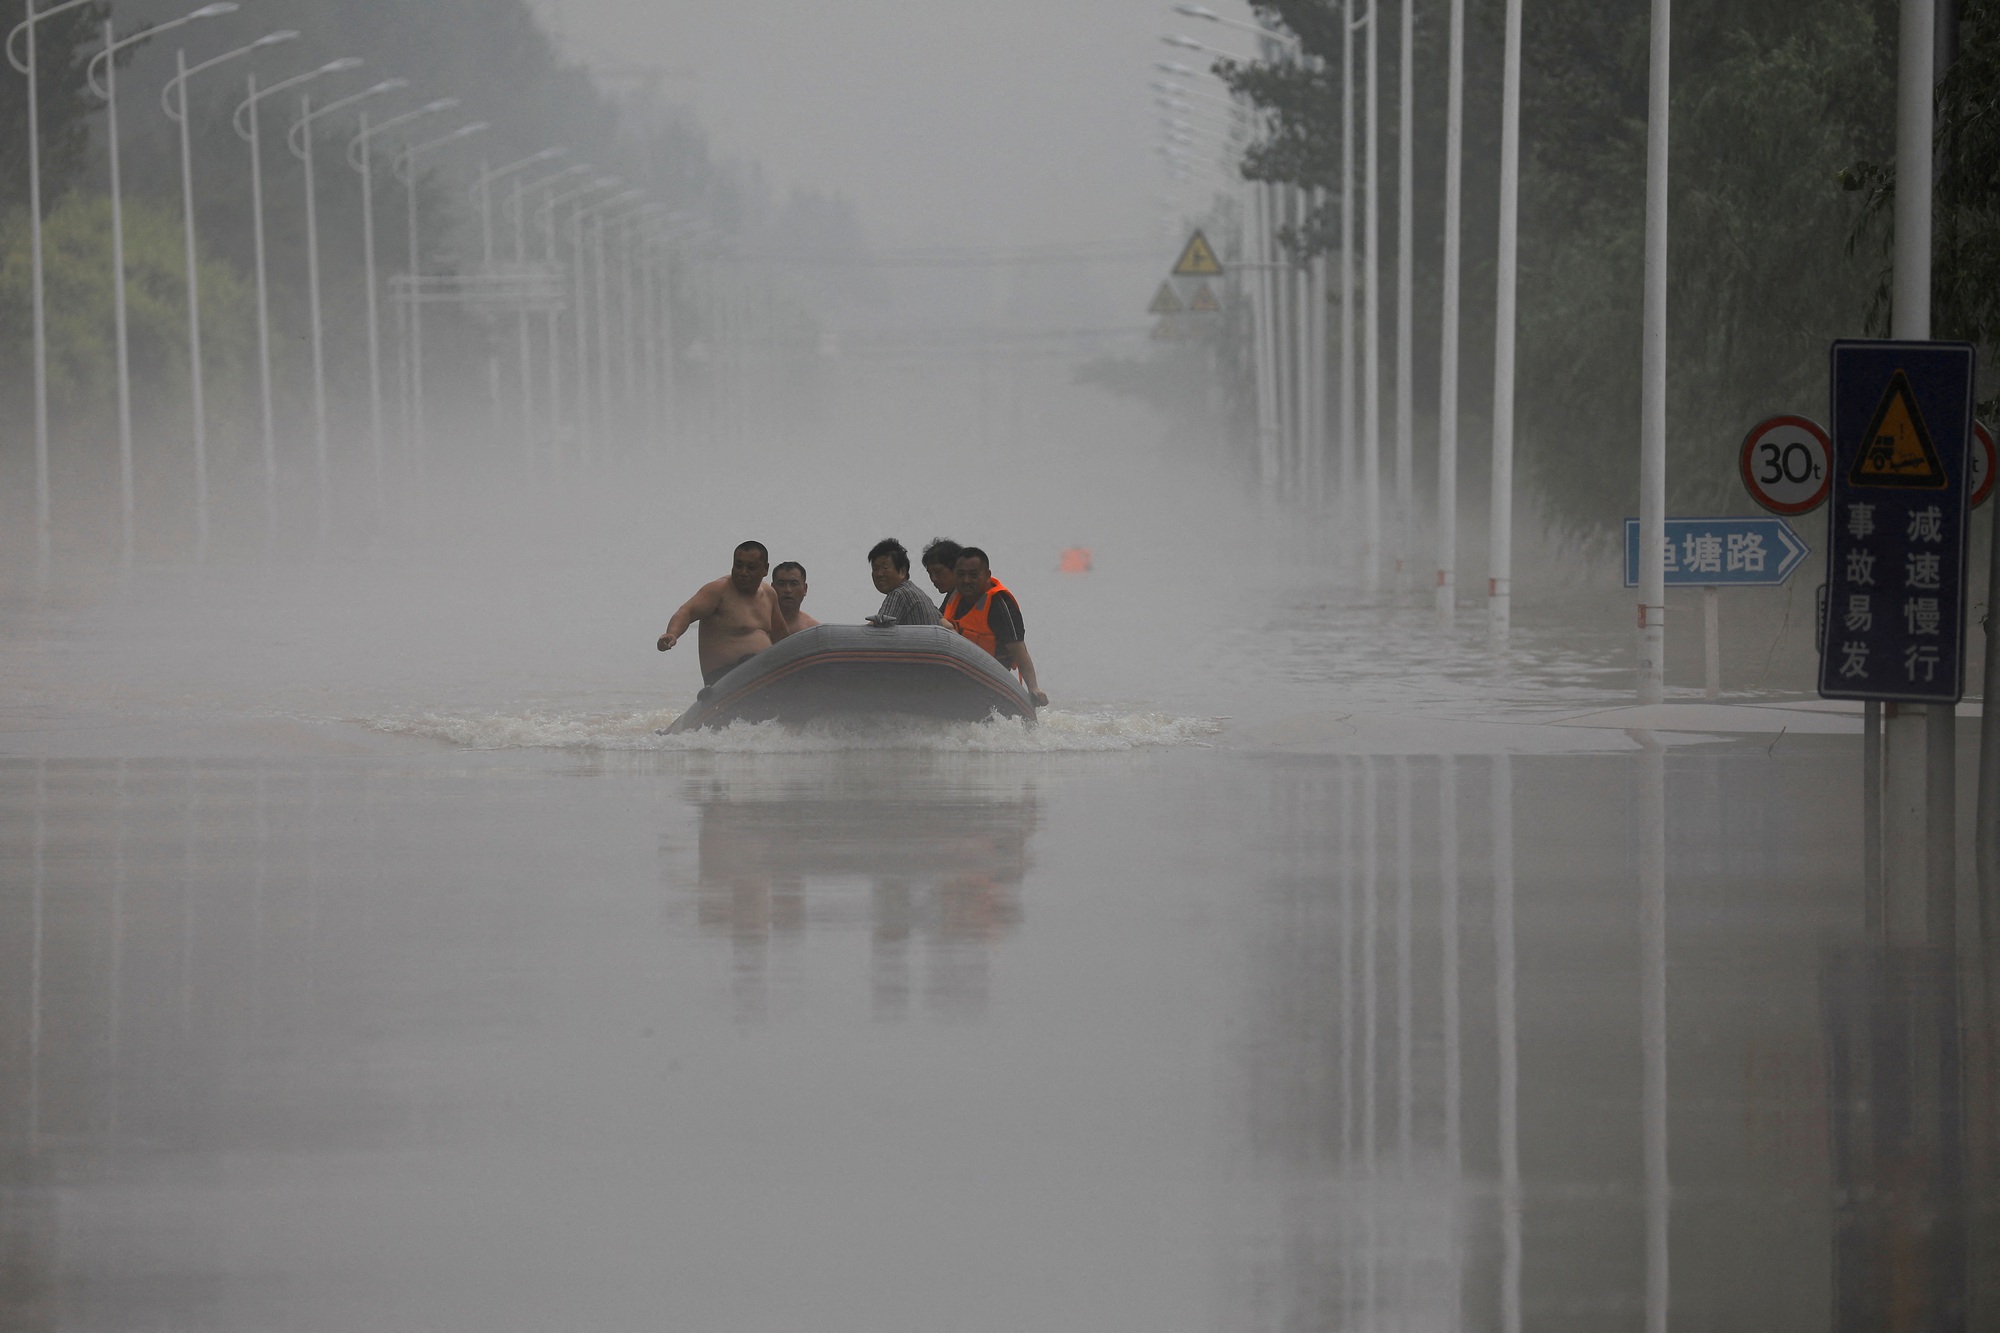 2023-08-06T030350Z_2061389527_RC28G2AL1UN5_RTRMADP_3_ASIA-WEATHER-CHINA-ANGER.JPG